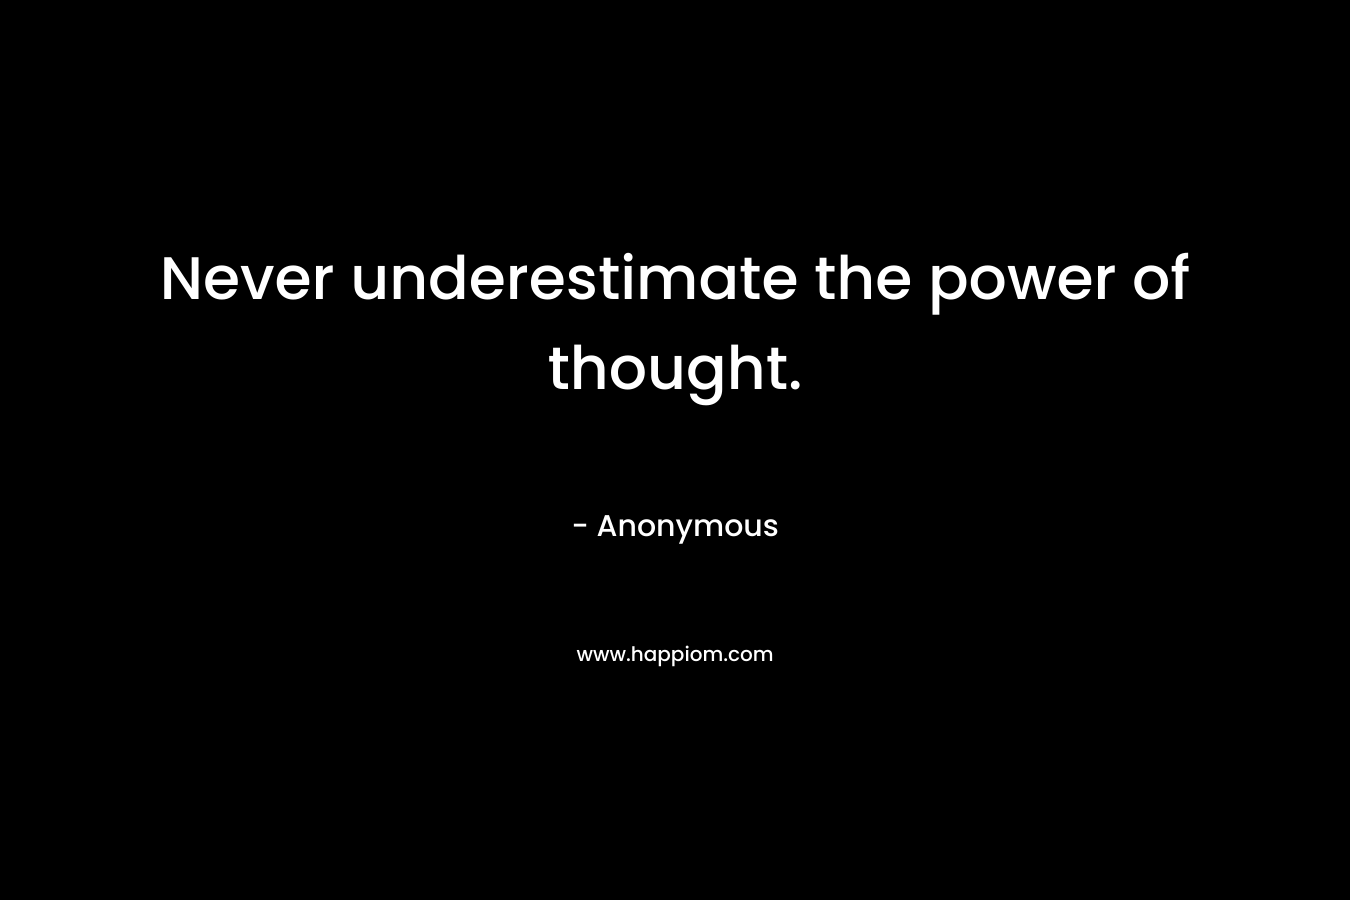 Never underestimate the power of thought.